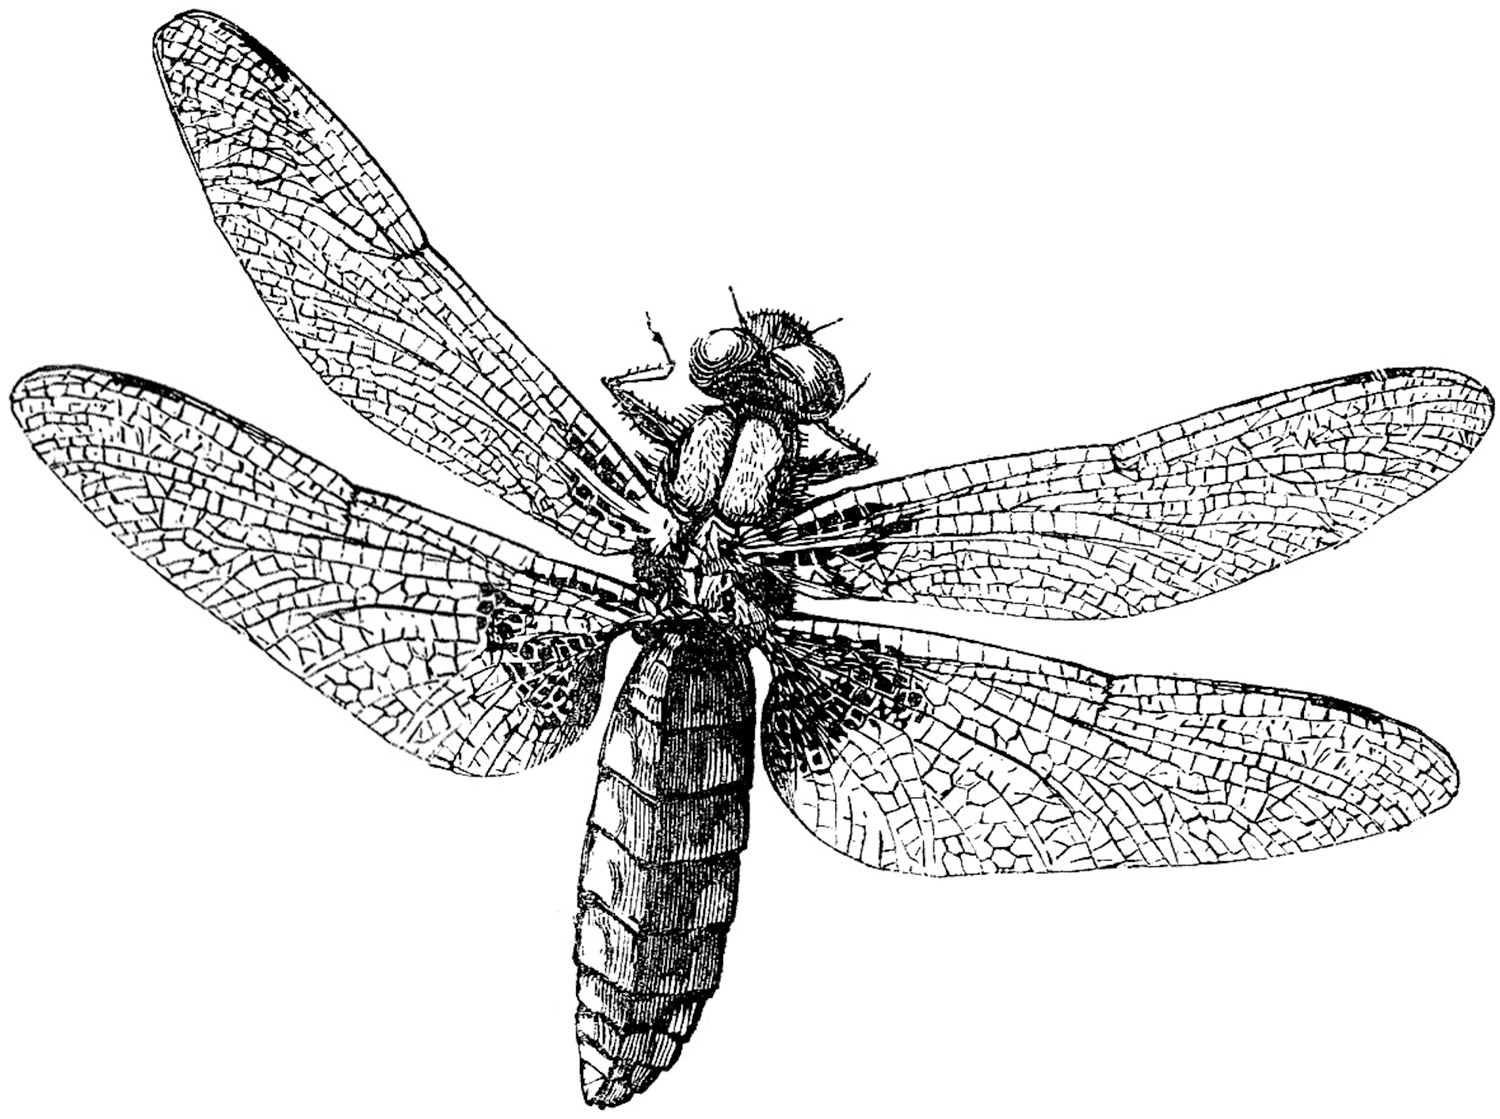 6 Dragonfly Images! - The Graphics Fairy